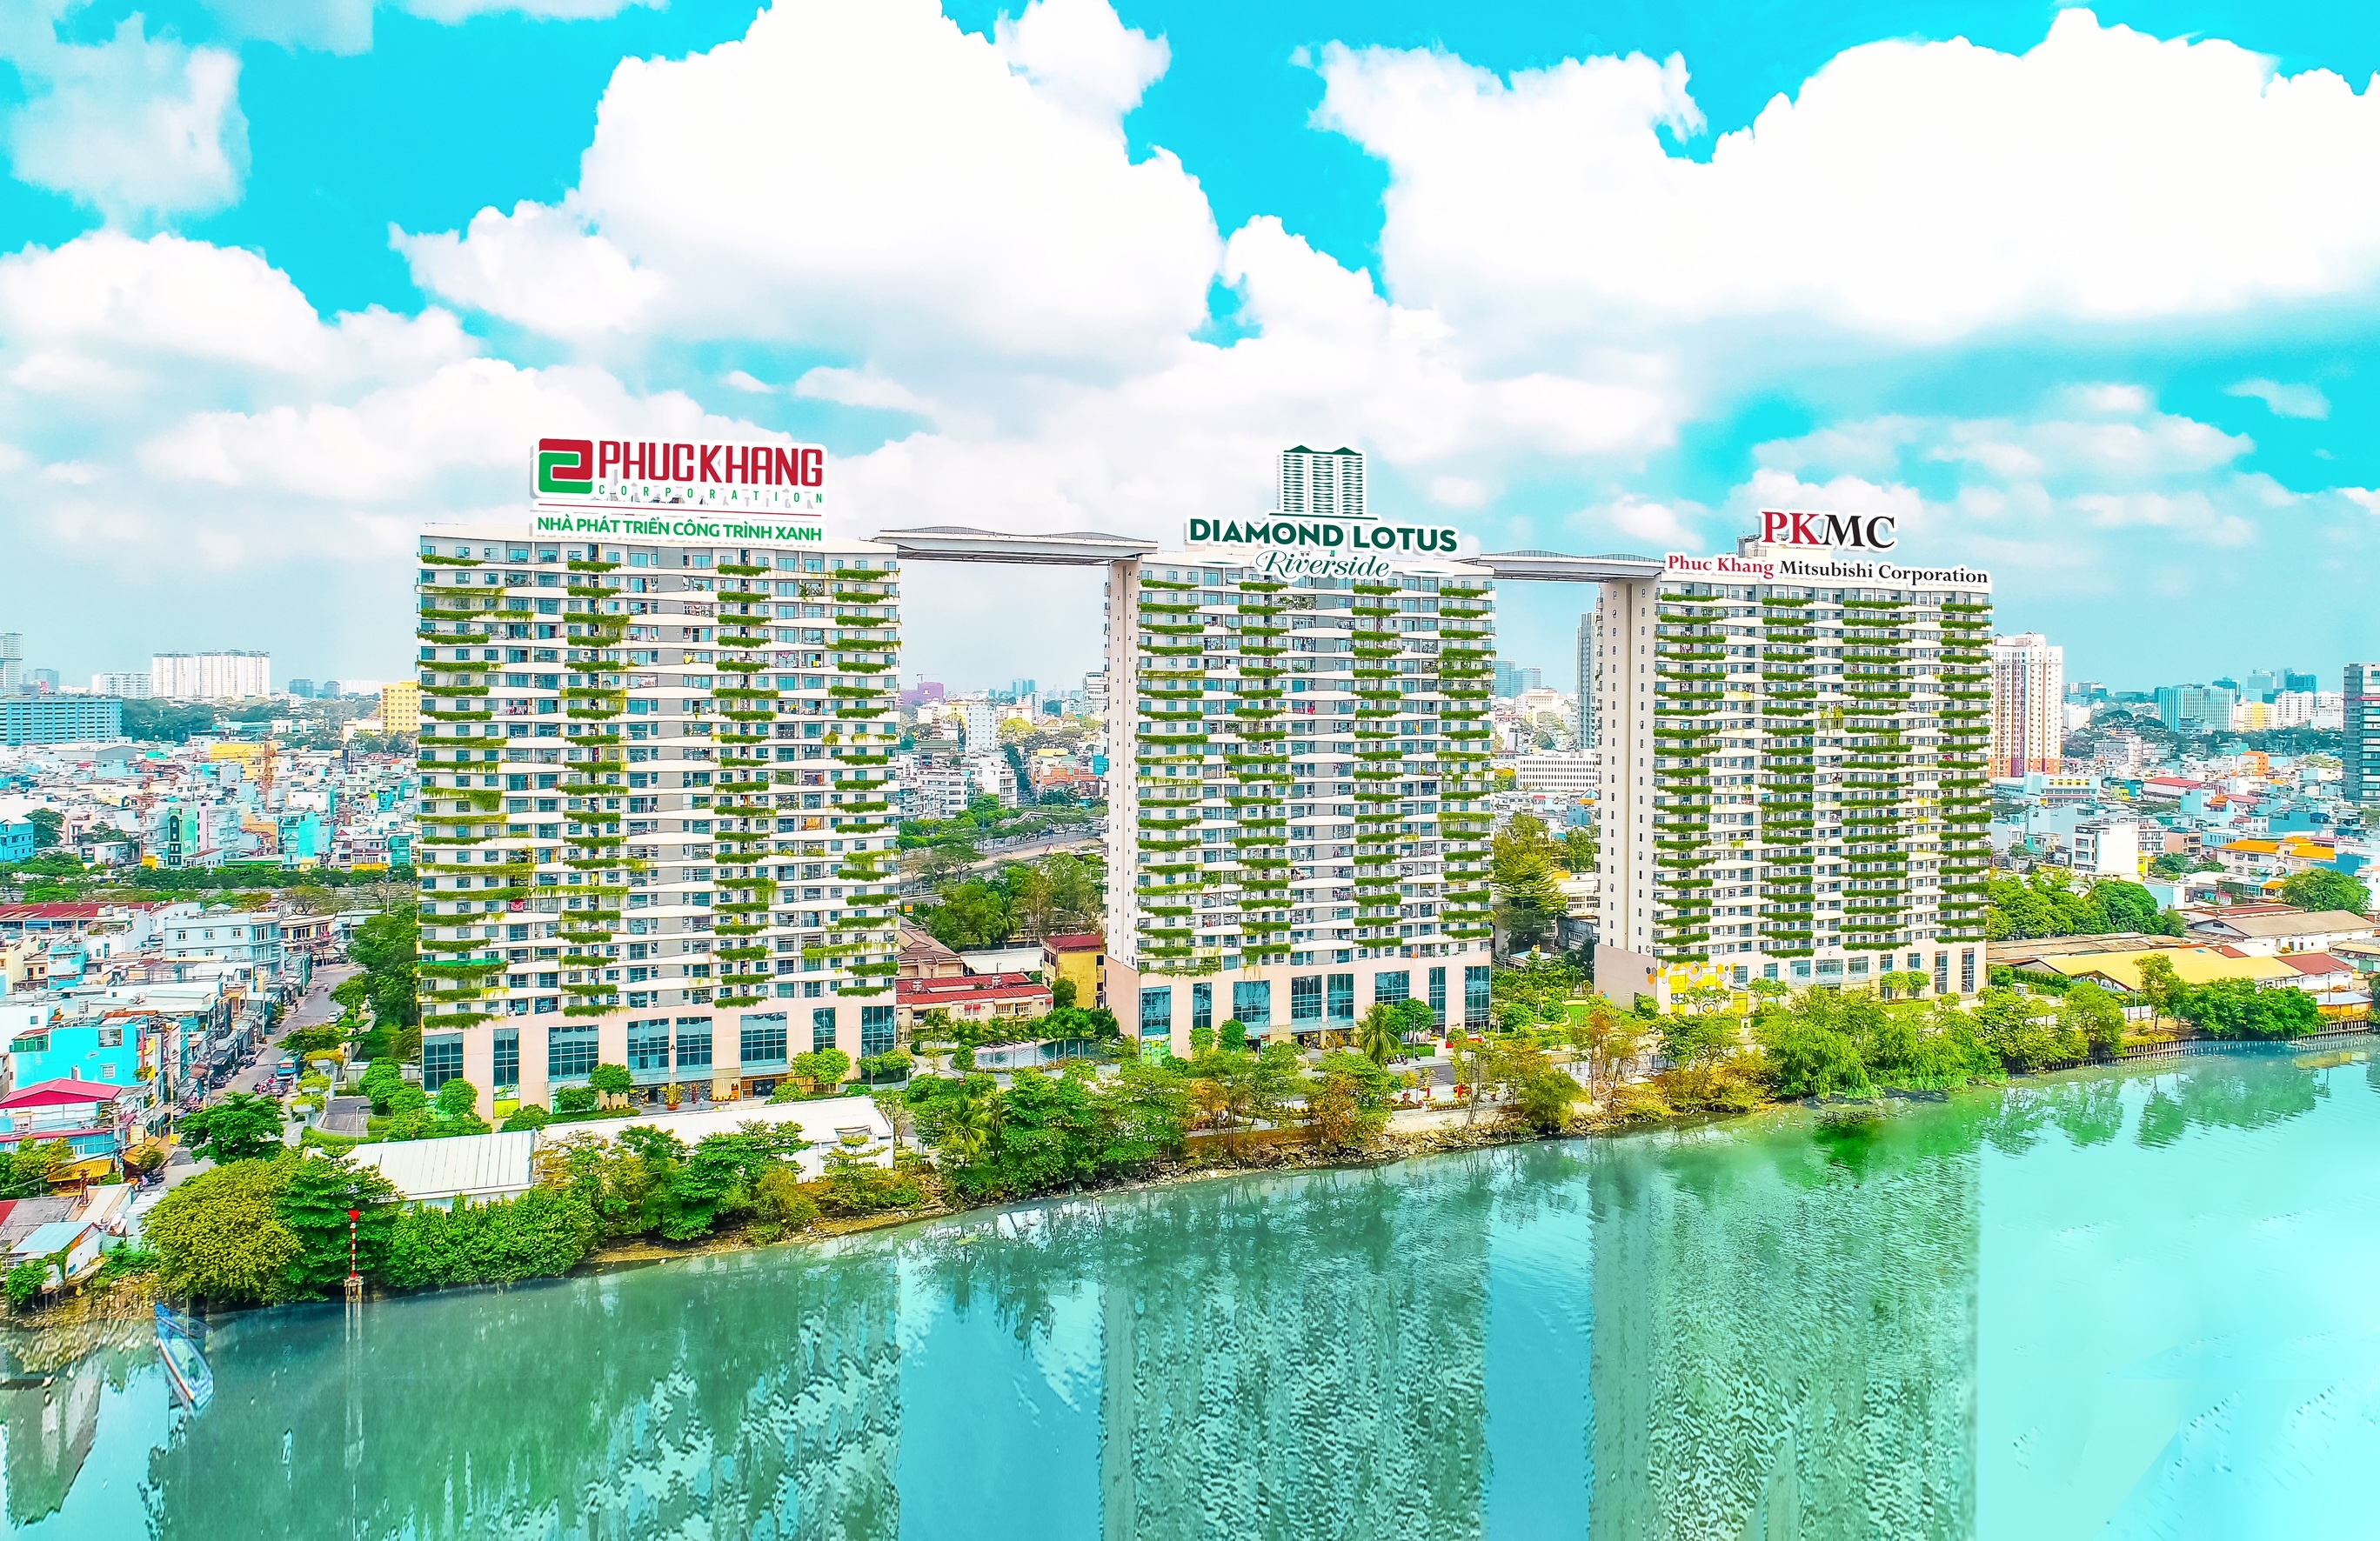 A real-life image of Diamond Lotus Riverside – the construction built according to international green standards with Japanese quality and technology